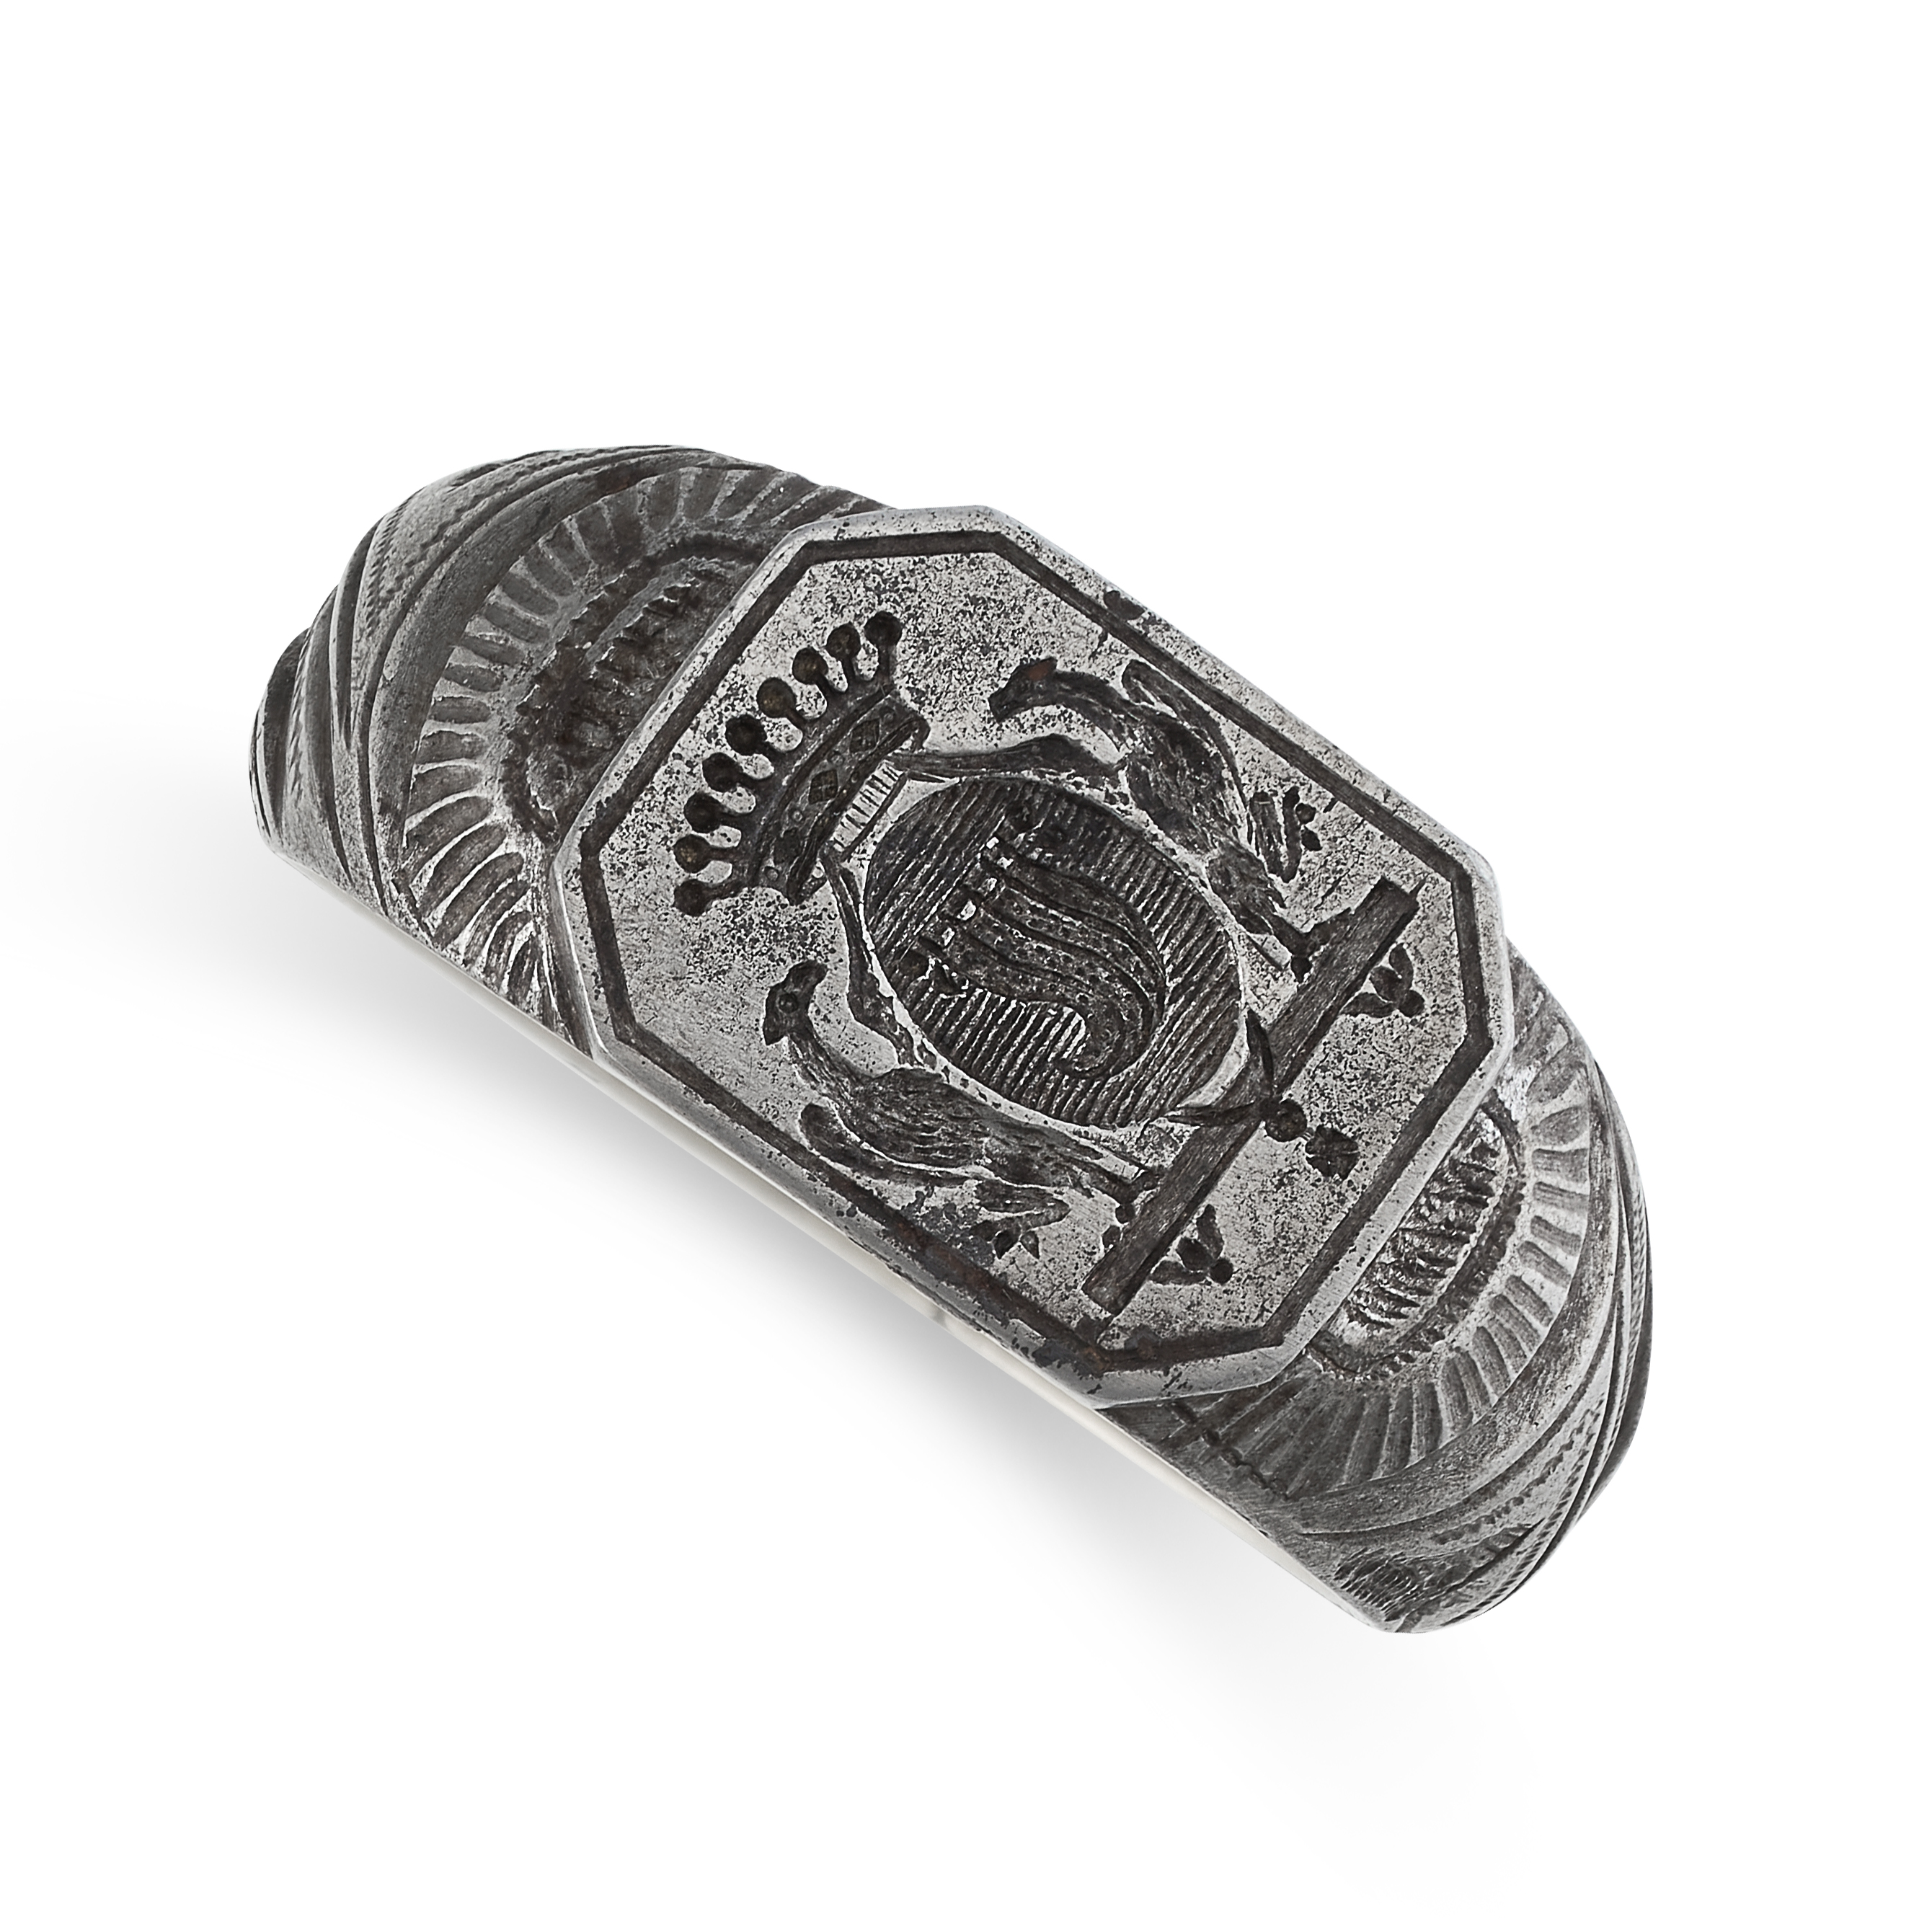 AN ANTIQUE STEEL INTAGLIO SEAL / SIGNET RING  The face reverse carved in detail to depict a coat